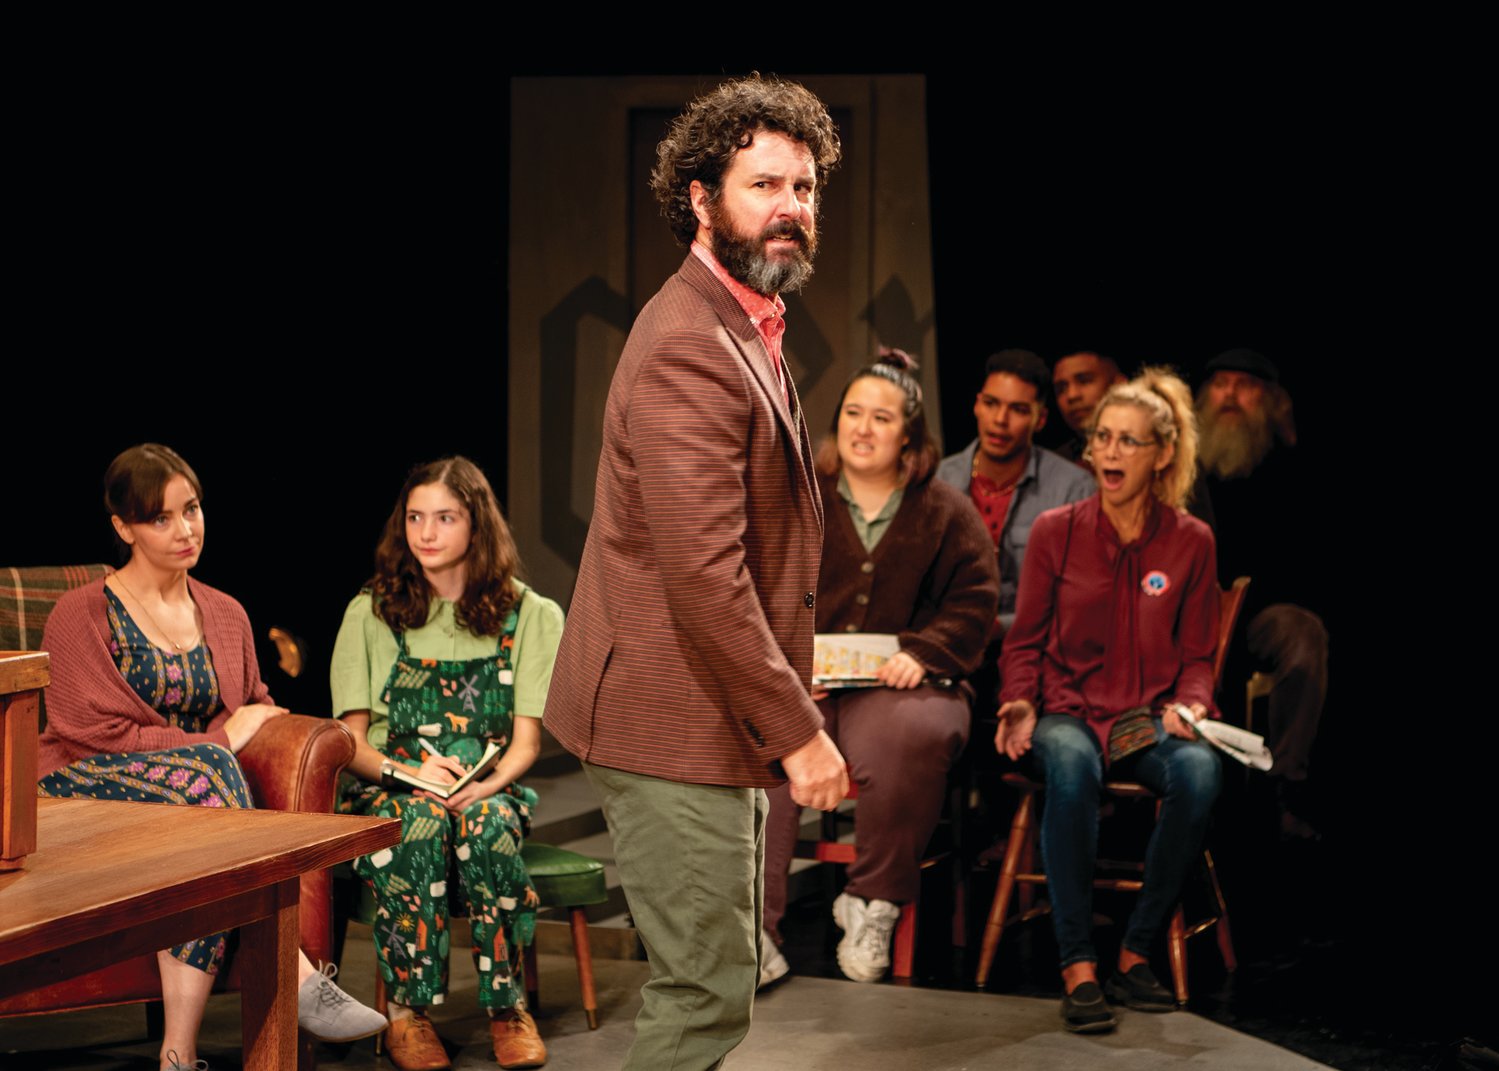 CENTER STAGE: Sean McConaghy (Dr. Thomas Stockman) “captures the stage” in “A Lie Agreed Upon,” writes Don Fowler. Pictured in the background, from left, are Donnla Hughes (Katherine Stockman), Aniko Moscarelli (Greta Stockman), Maria Noriko Cabral (Townsperson), Erik Robles (Townsperson) and Sarah Sinclair (Townsperson). LIE_press6 Jomo Peters (Captain Horster), Fred Sullivan Jr. (Aslaksen), Jonathan Higginbotham (Peter Stockman), Sean McConaghy (Dr. Thomas Stockman) Background L to R: Donnla Hughes (Katherine Stockman), Aniko Moscarelli (Greta Stockman) LIE_press7 Fred Sullivan Jr. (Aslaksen), Sean McConaghy (Dr. Thomas Stockman) Background L to R: Nora Eschenheimer (Thea Hovstad), Jeff Ararat (Billings)